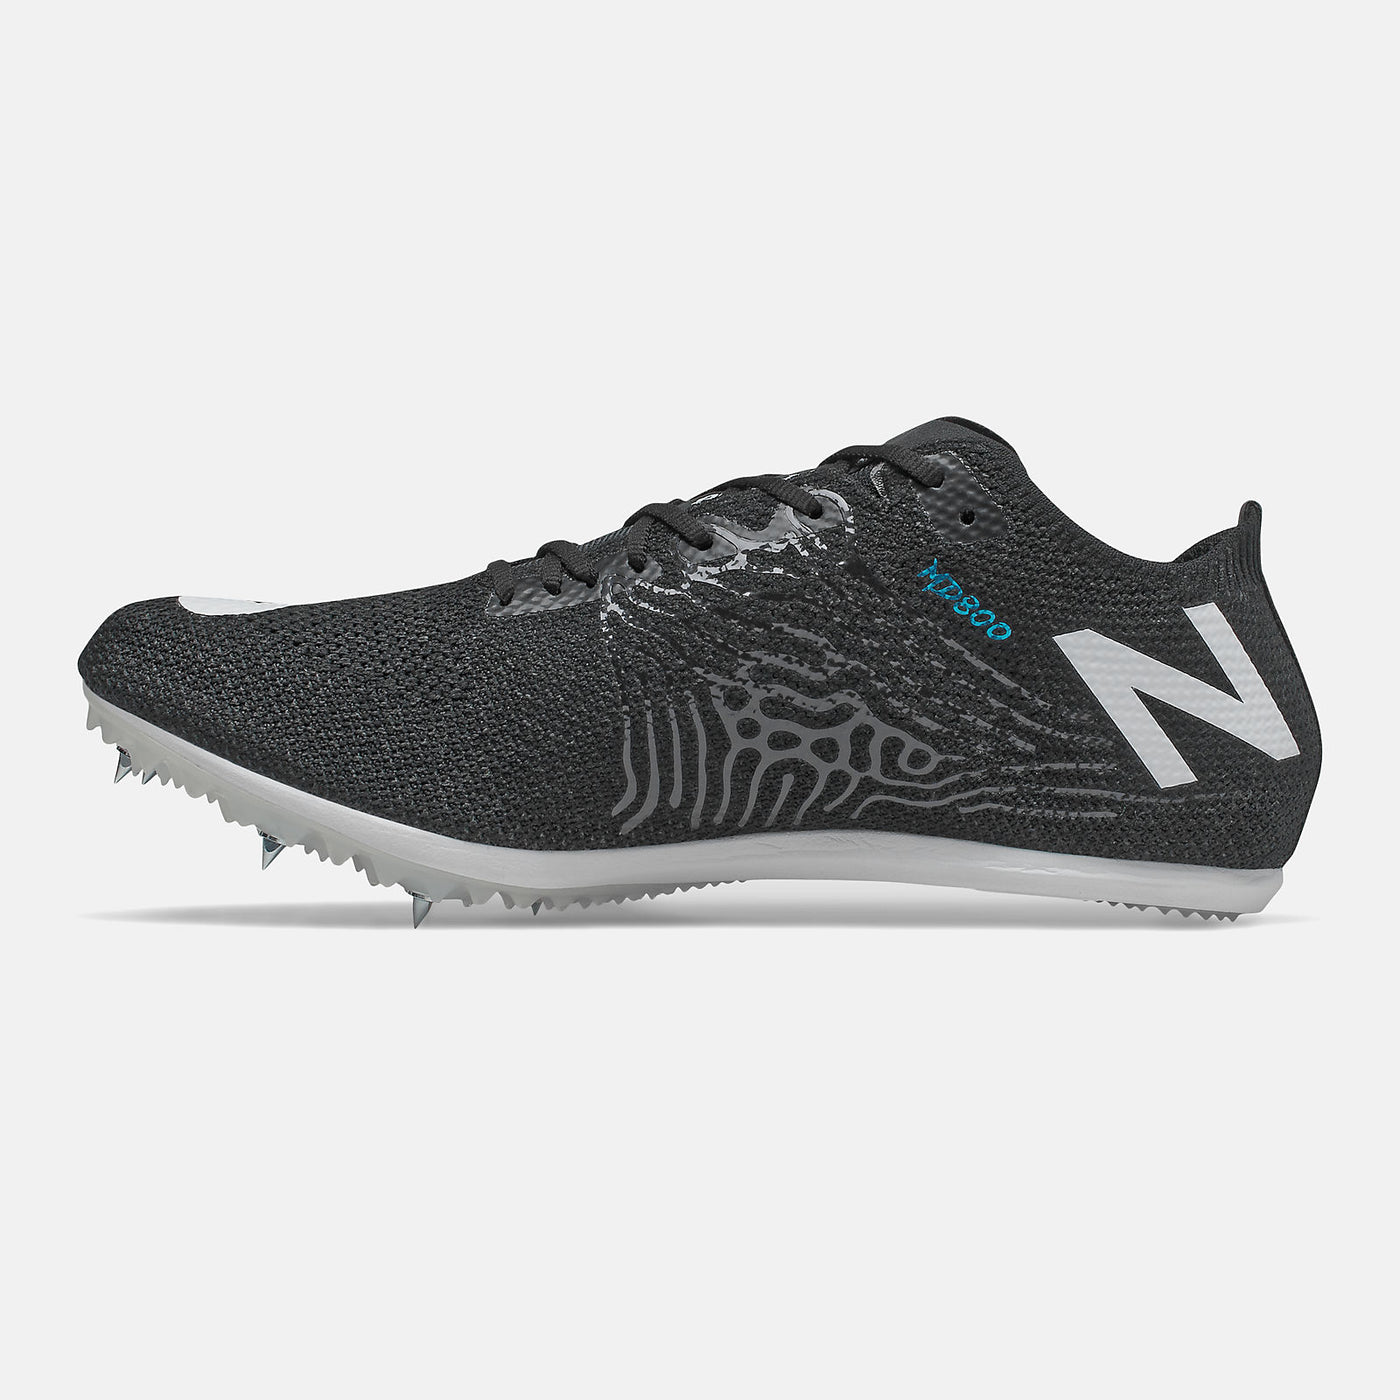 New Balance MD800 7 Middle Distance Spike women's